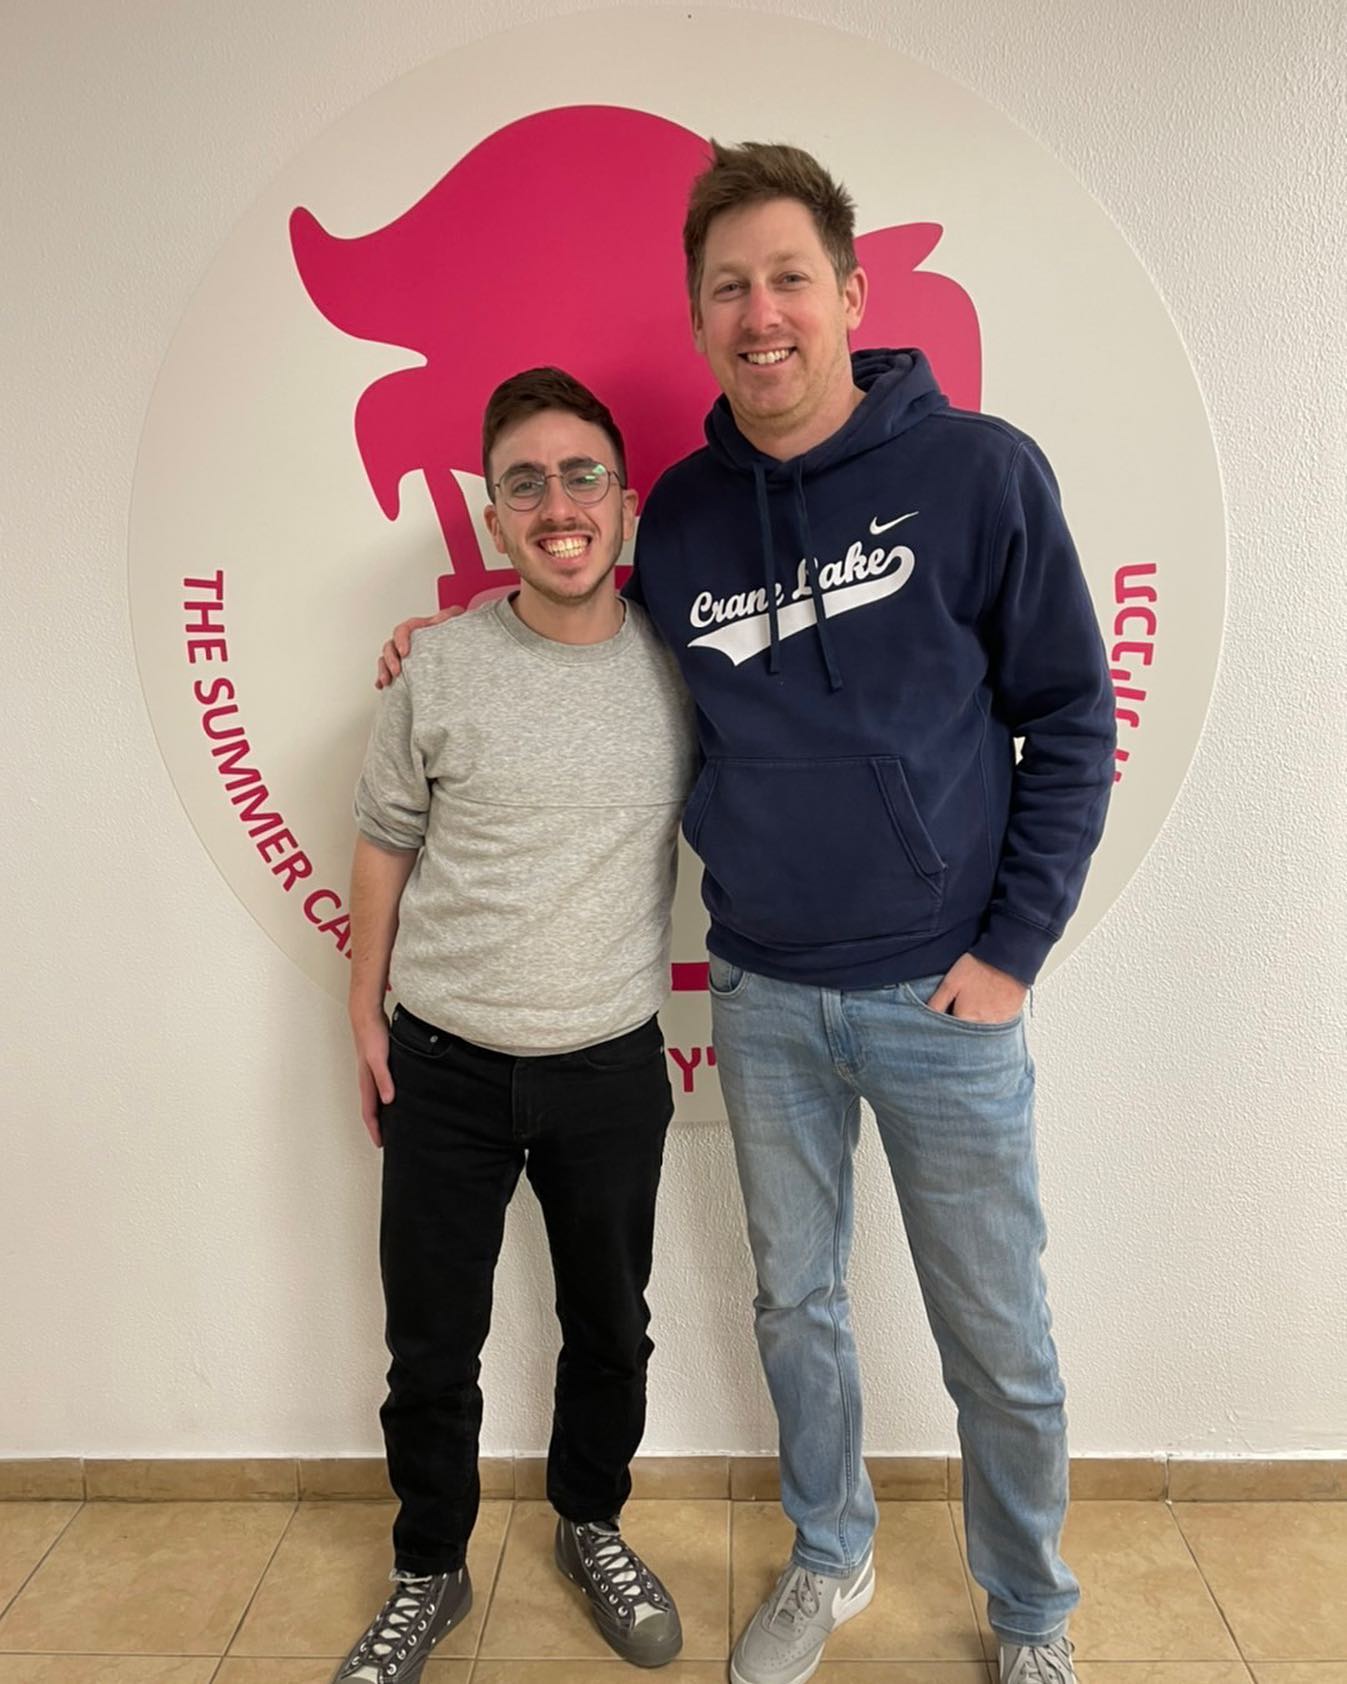 Hello from Israel! Efraim is busy hiring some amazing Shlichim (Israeli Emissaries) from @jaficamps for Summer 2023, with some help from a familiar face!